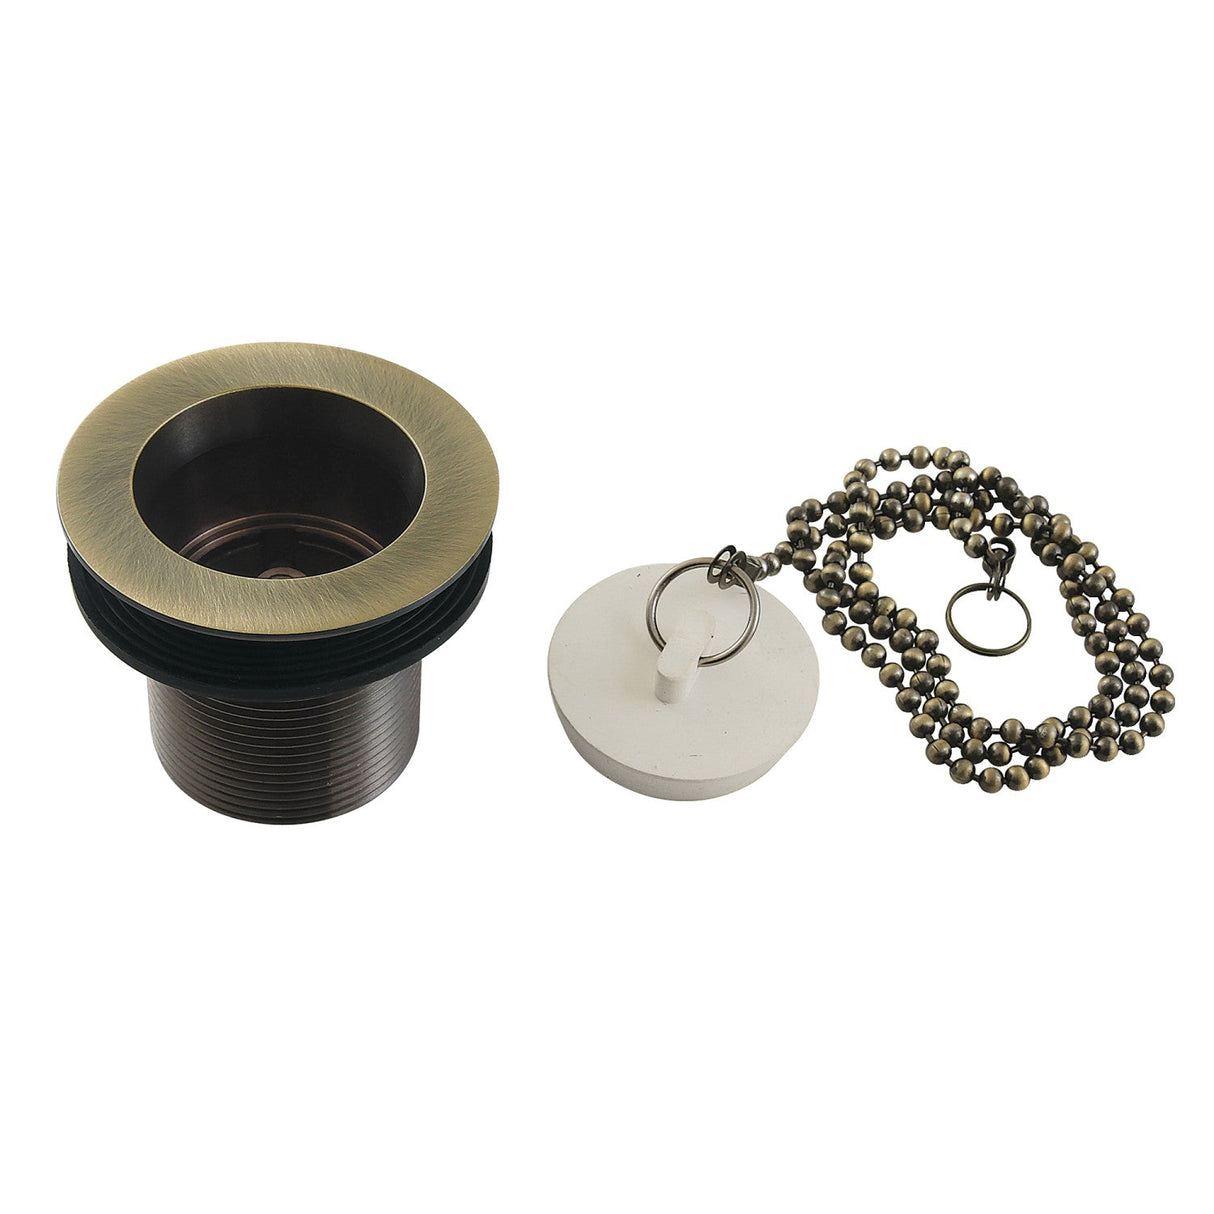 Made To Match DSP17AB 1-1/2-Inch Chain and Stopper Tub Drain with 1-3/4-Inch Body Thread, Antique Brass